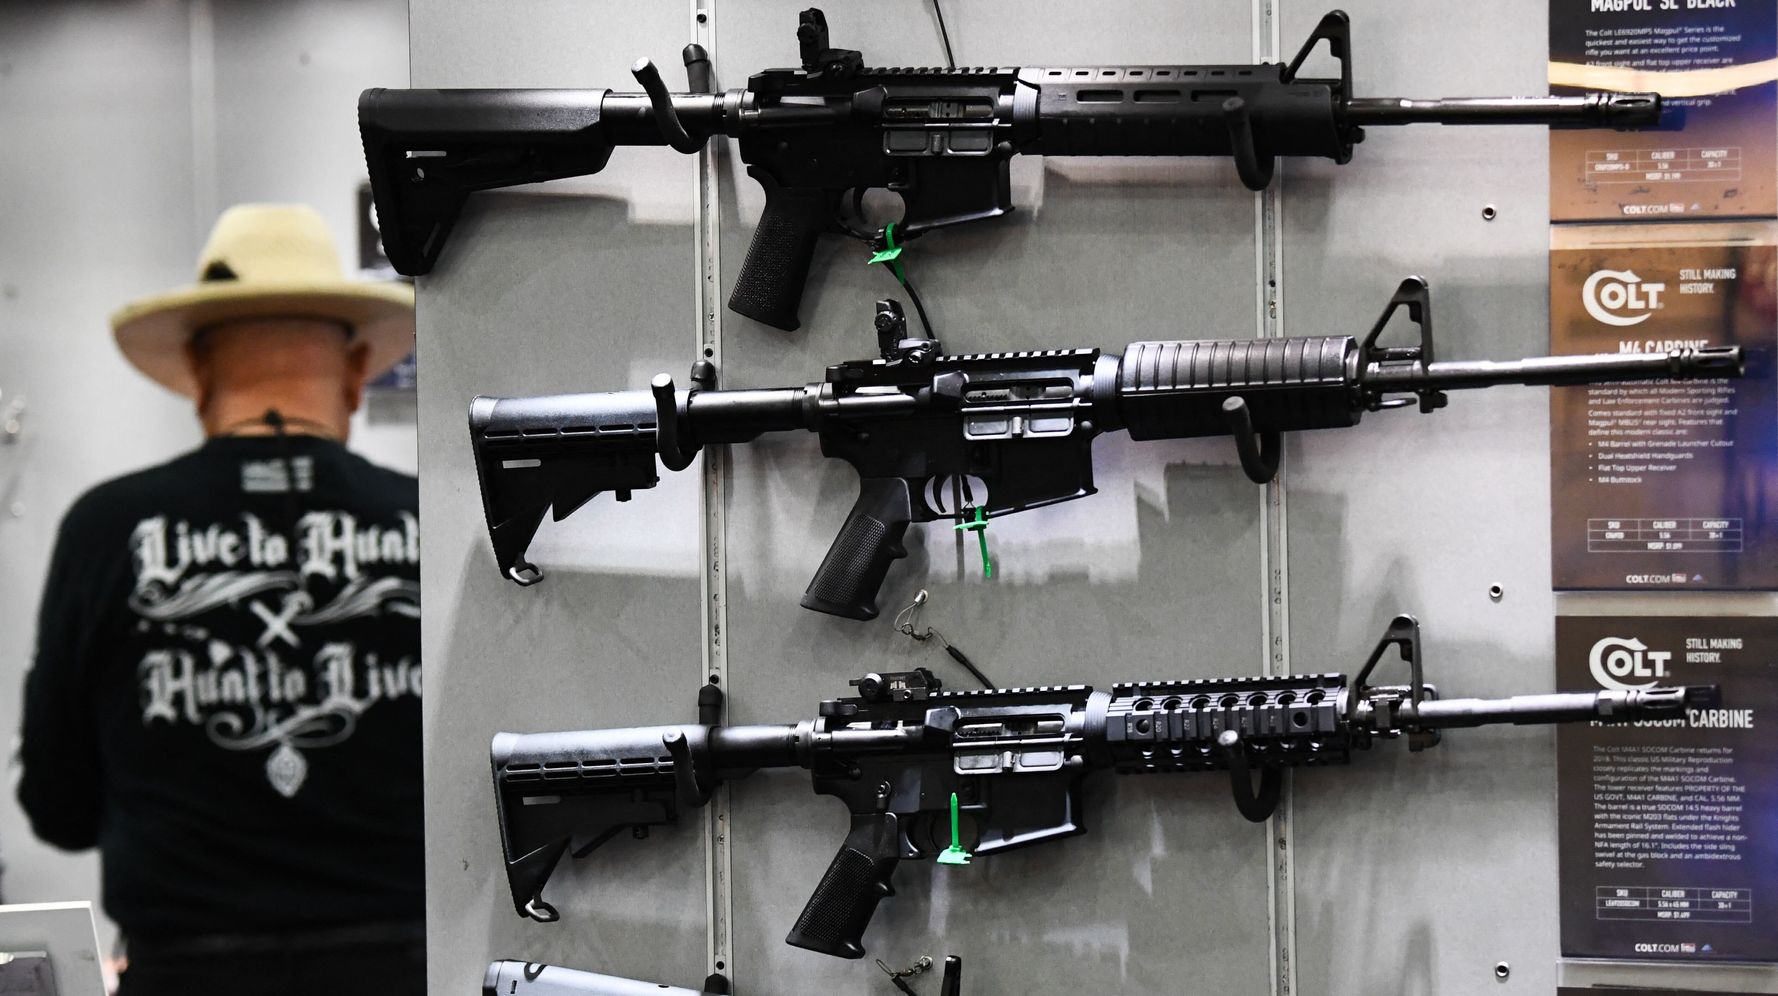 Extremist Gun Group Says To Prepare For Battle At U.S. Capitol Amid Gun Control Talks